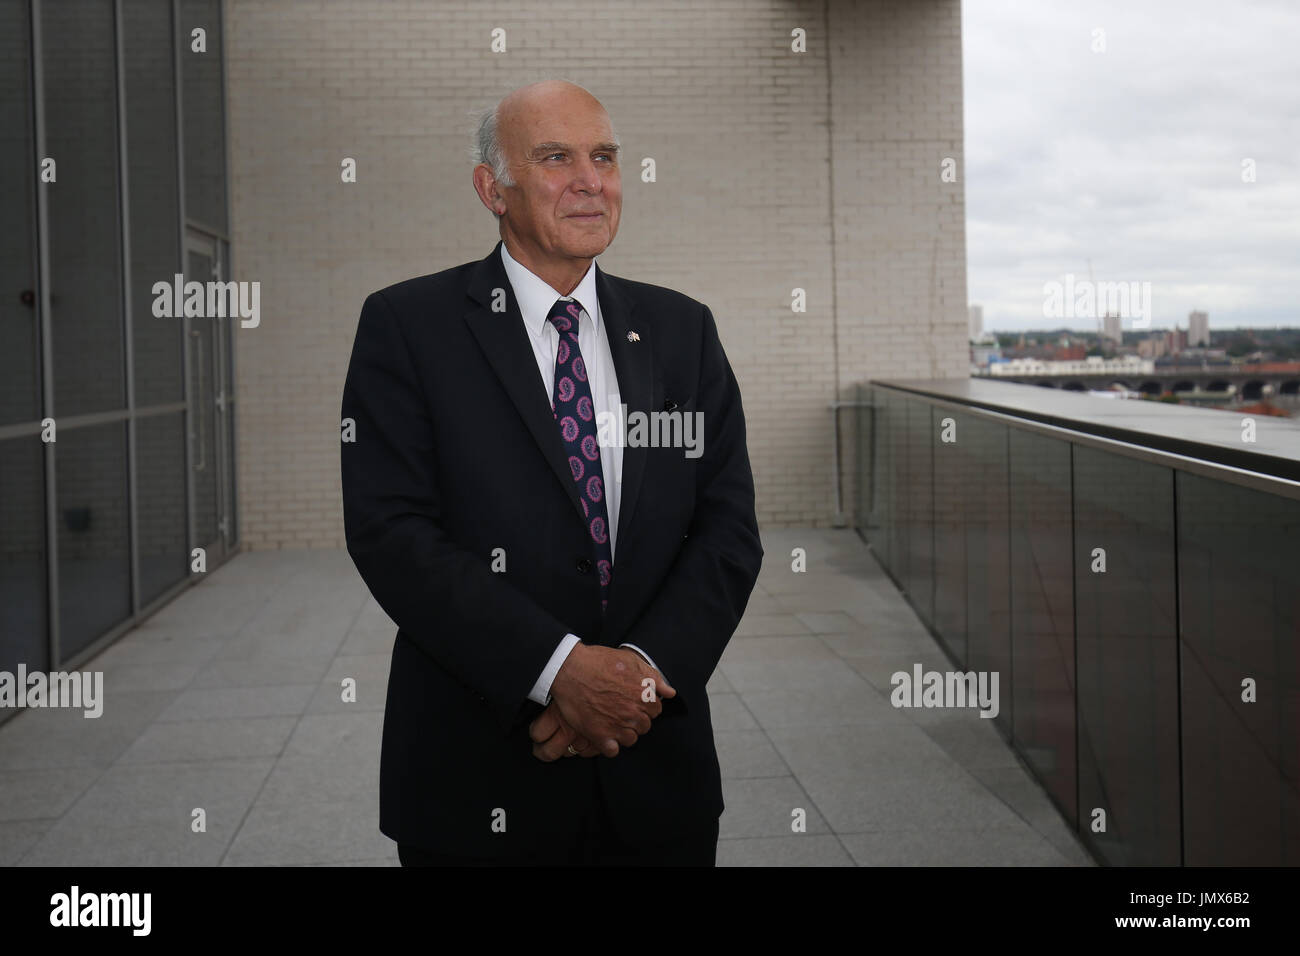 Liberal Democrats leader Sir Vince Cable after speaking at Birmingham City University's Centre for Brexit Studies. Stock Photo